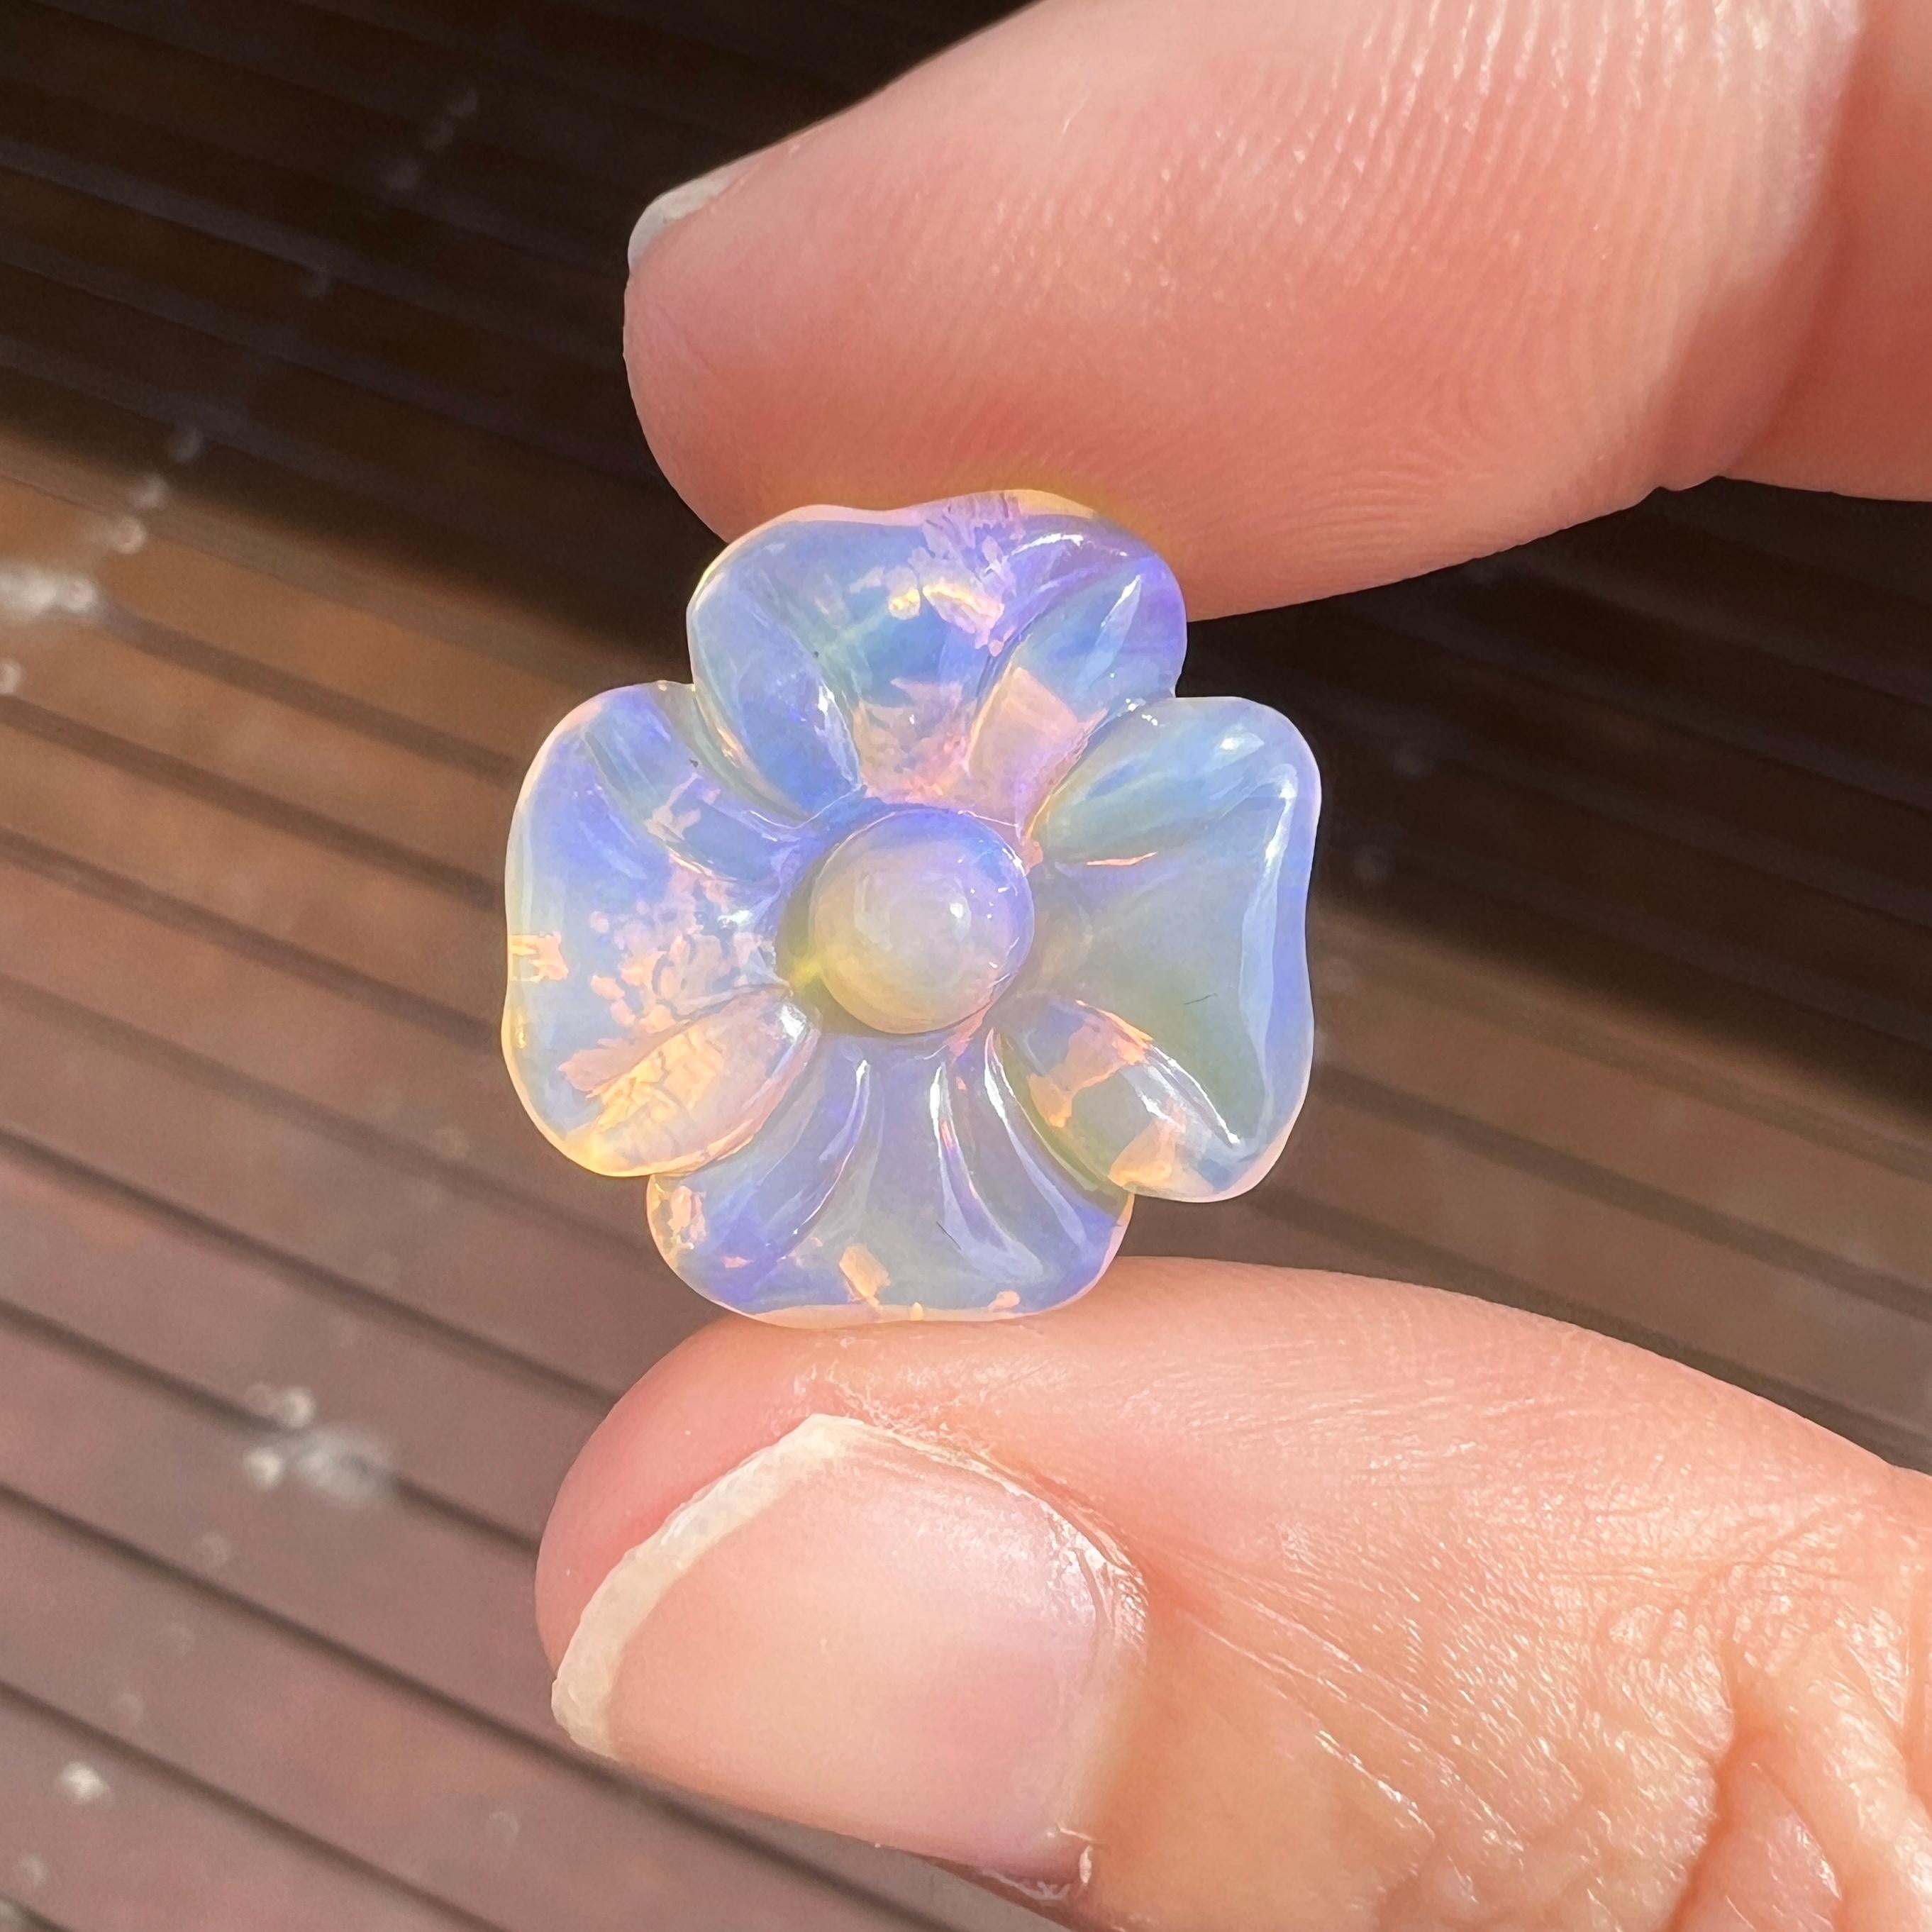 This beautiful 7.61 Ct Australian wood replacement opal was mined by Sue Cooper at her Russells opal mine in western Queensland, Australia in 2021. Sue processed the rough opal herself and selected it to be carved into a flower. The opal's size of